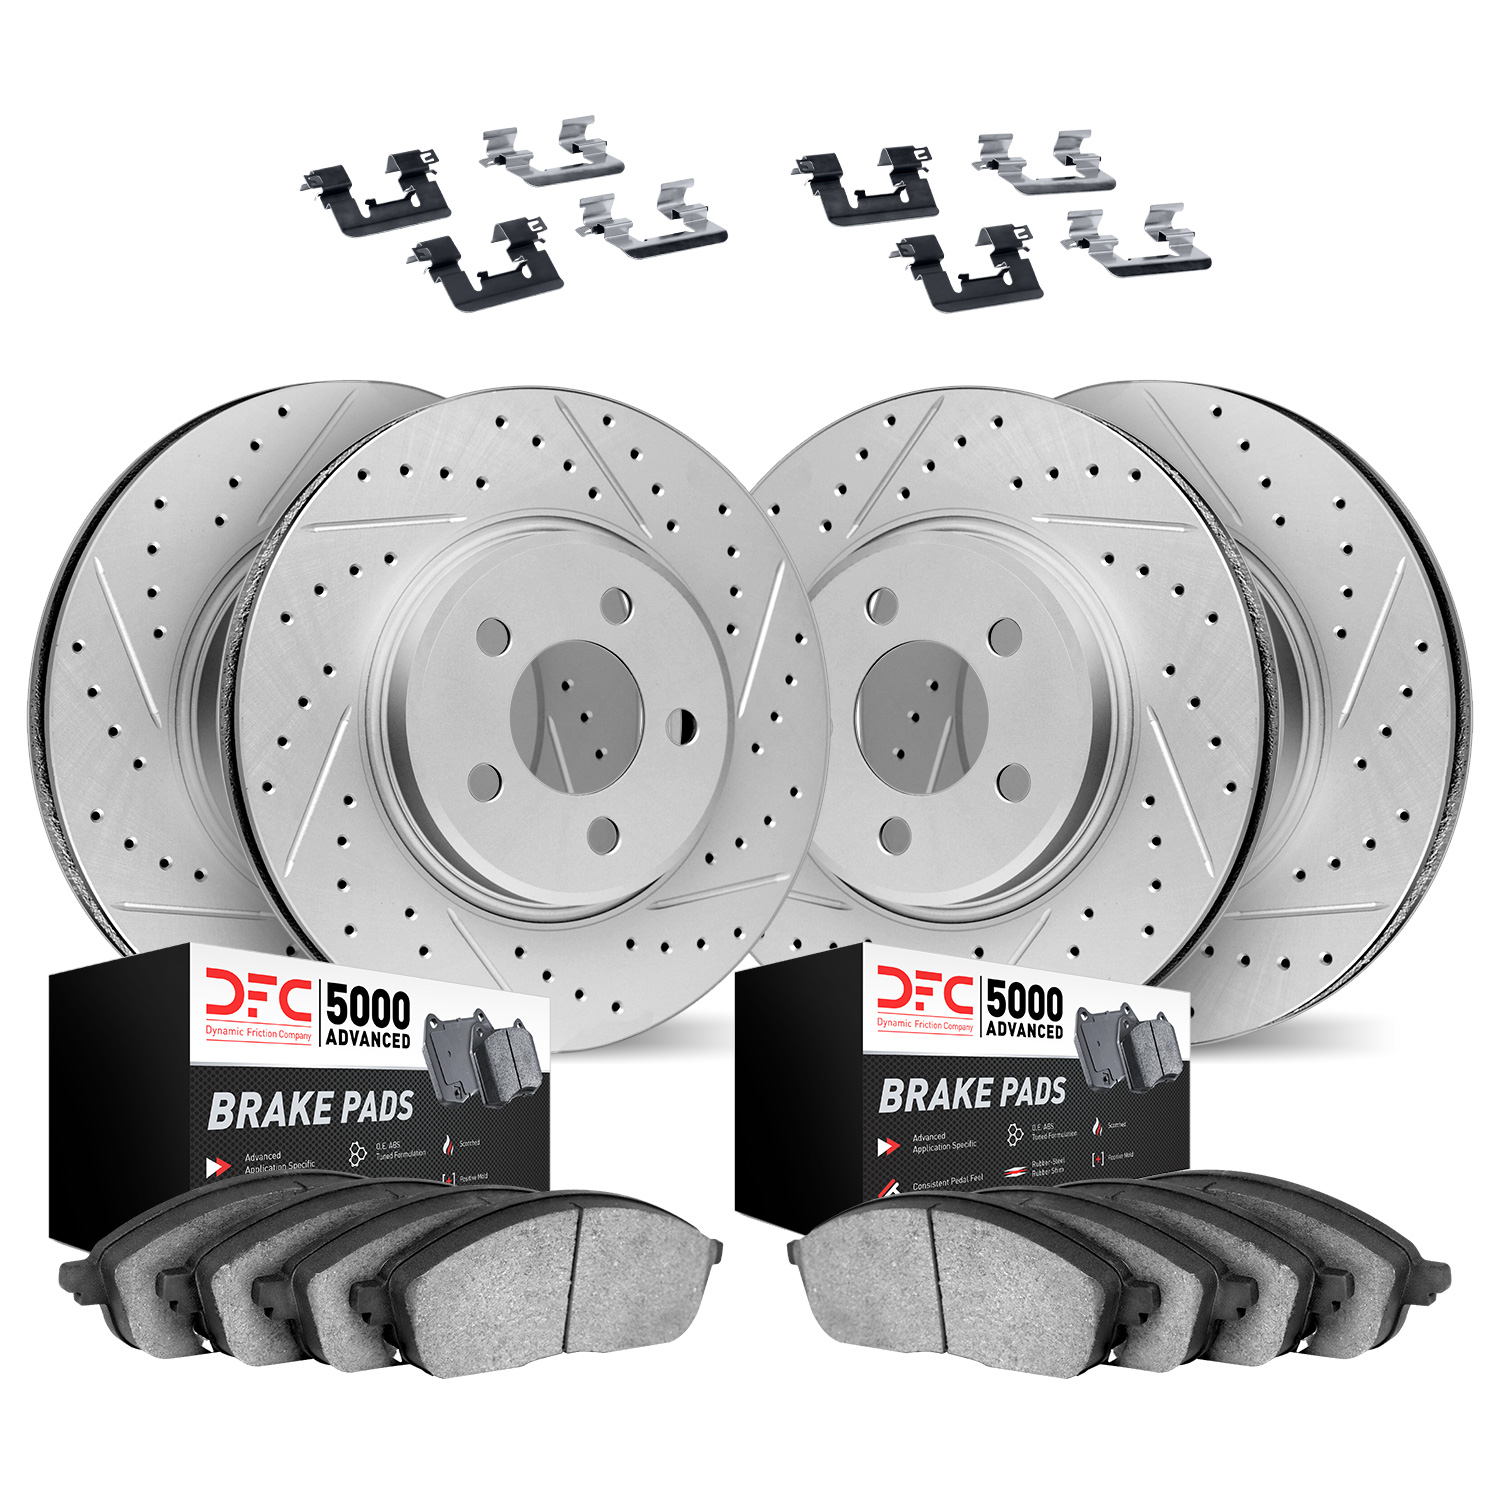 2514-54273 Geoperformance Drilled/Slotted Rotors w/5000 Advanced Brake Pads Kit & Hardware, Fits Select Ford/Lincoln/Mercury/Maz